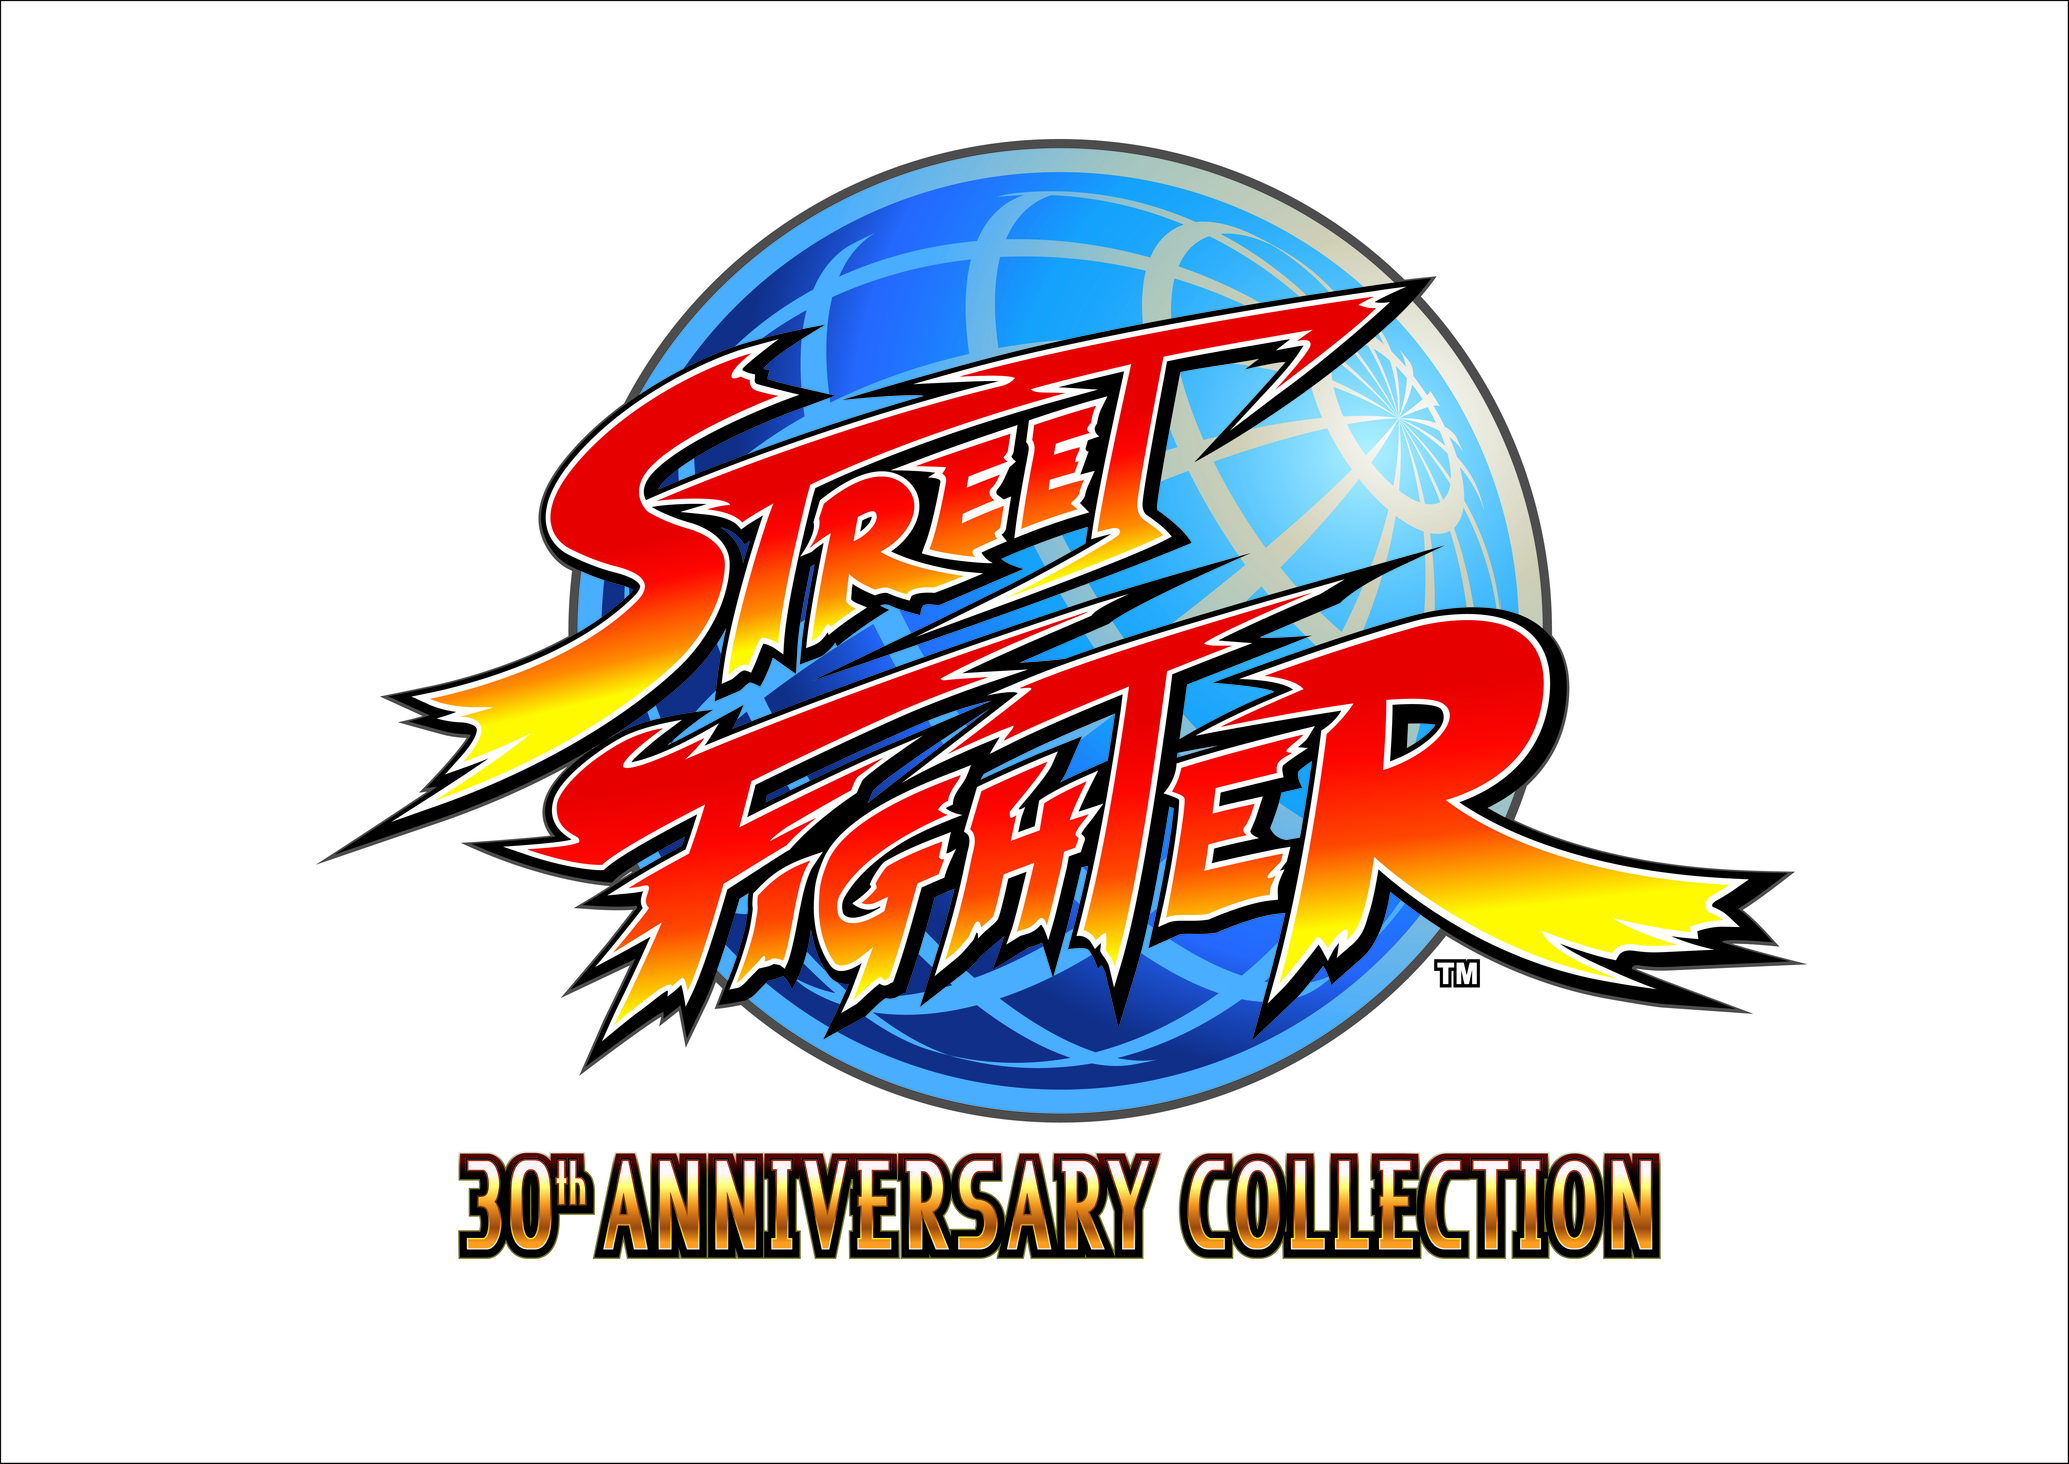 General 2069x1464 Street Fighter video game art Capcom logo video games Street Fighter 30th Anniversary Collection simple background white background